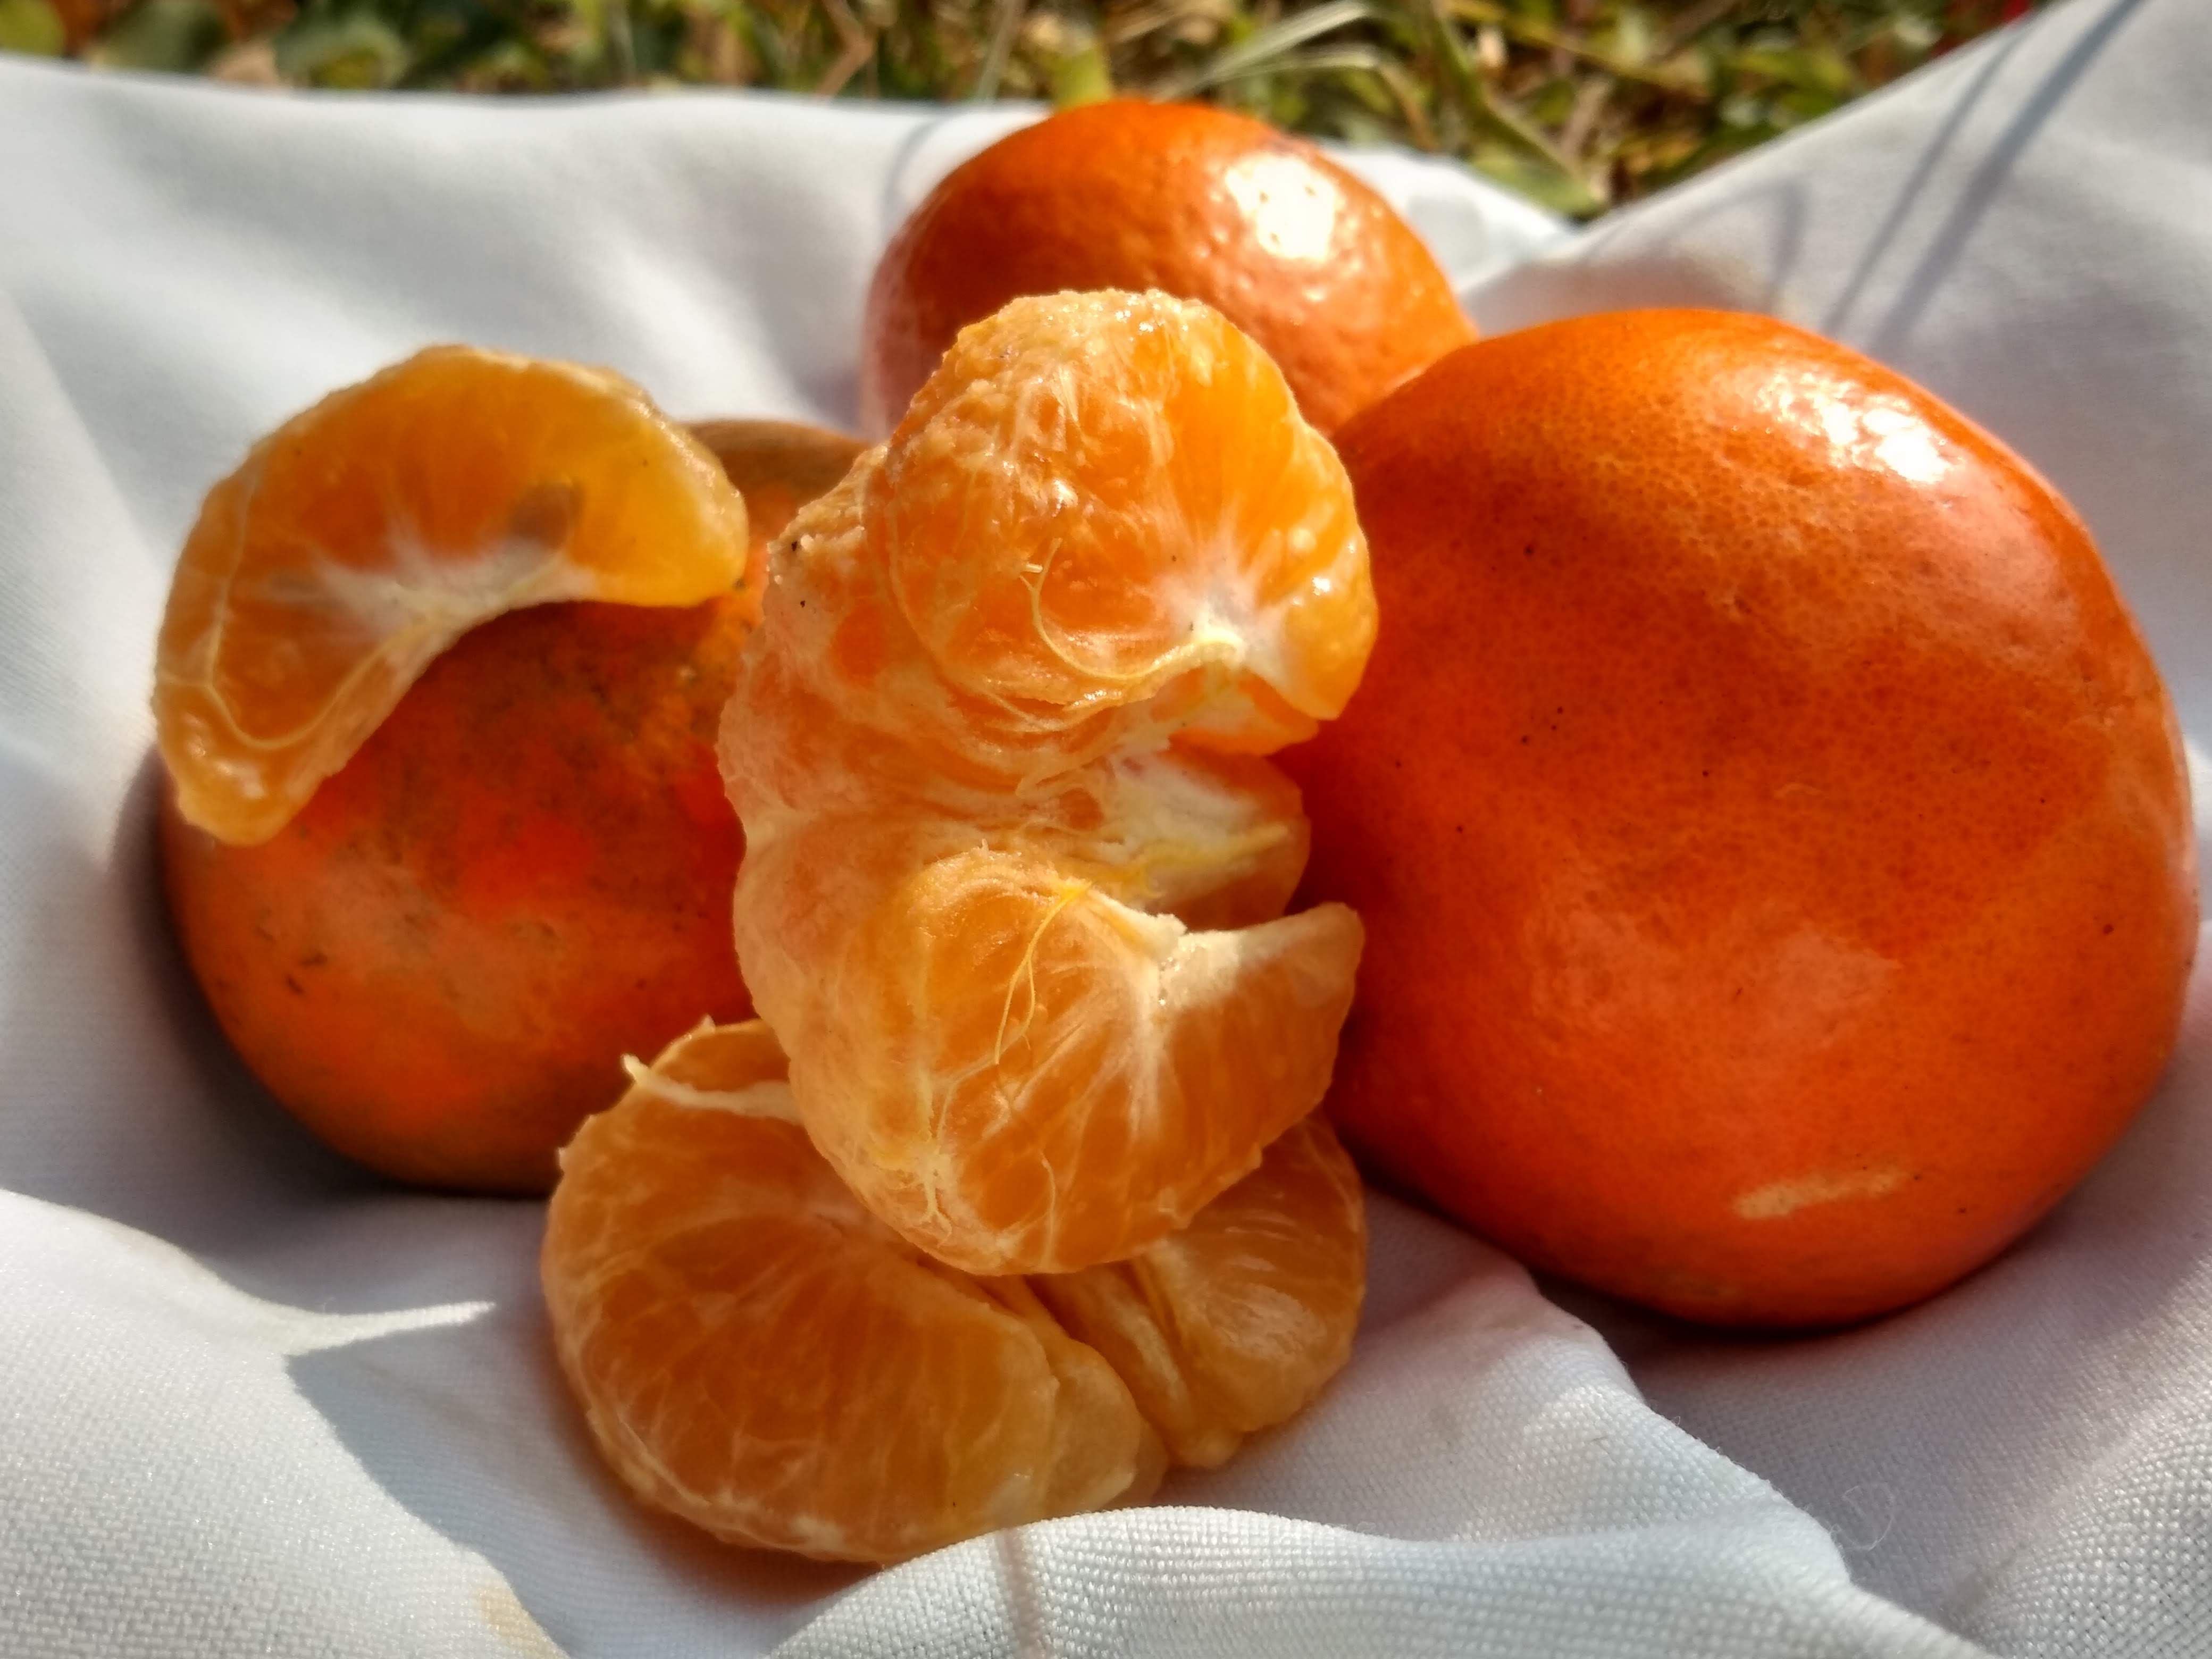 Citrus season arrives at the end of September (Minister of Agriculture and Rural Development)